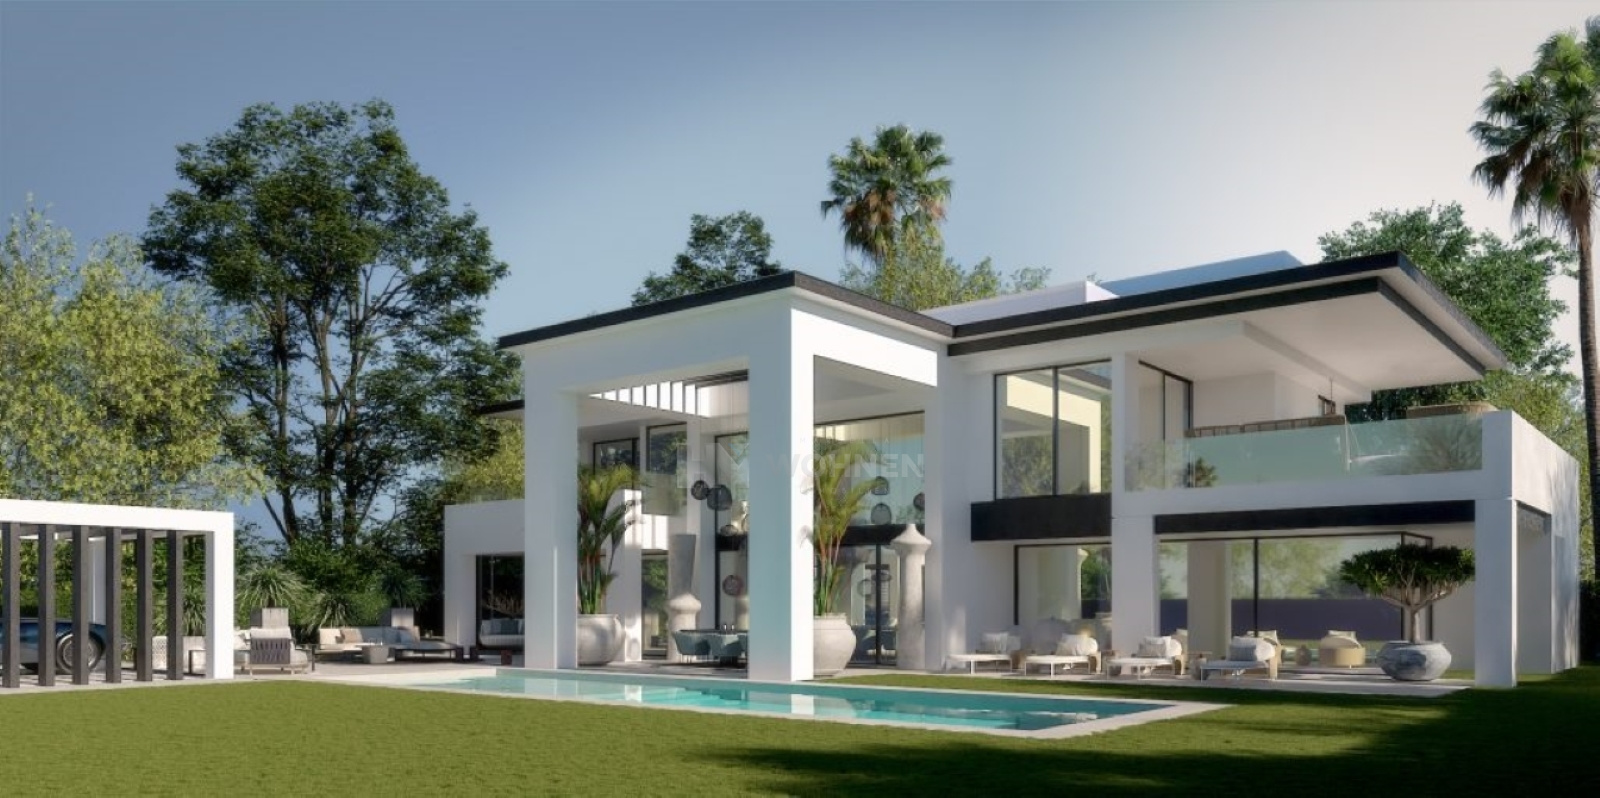 Exclusive project of 3 luxury contemporary style villas